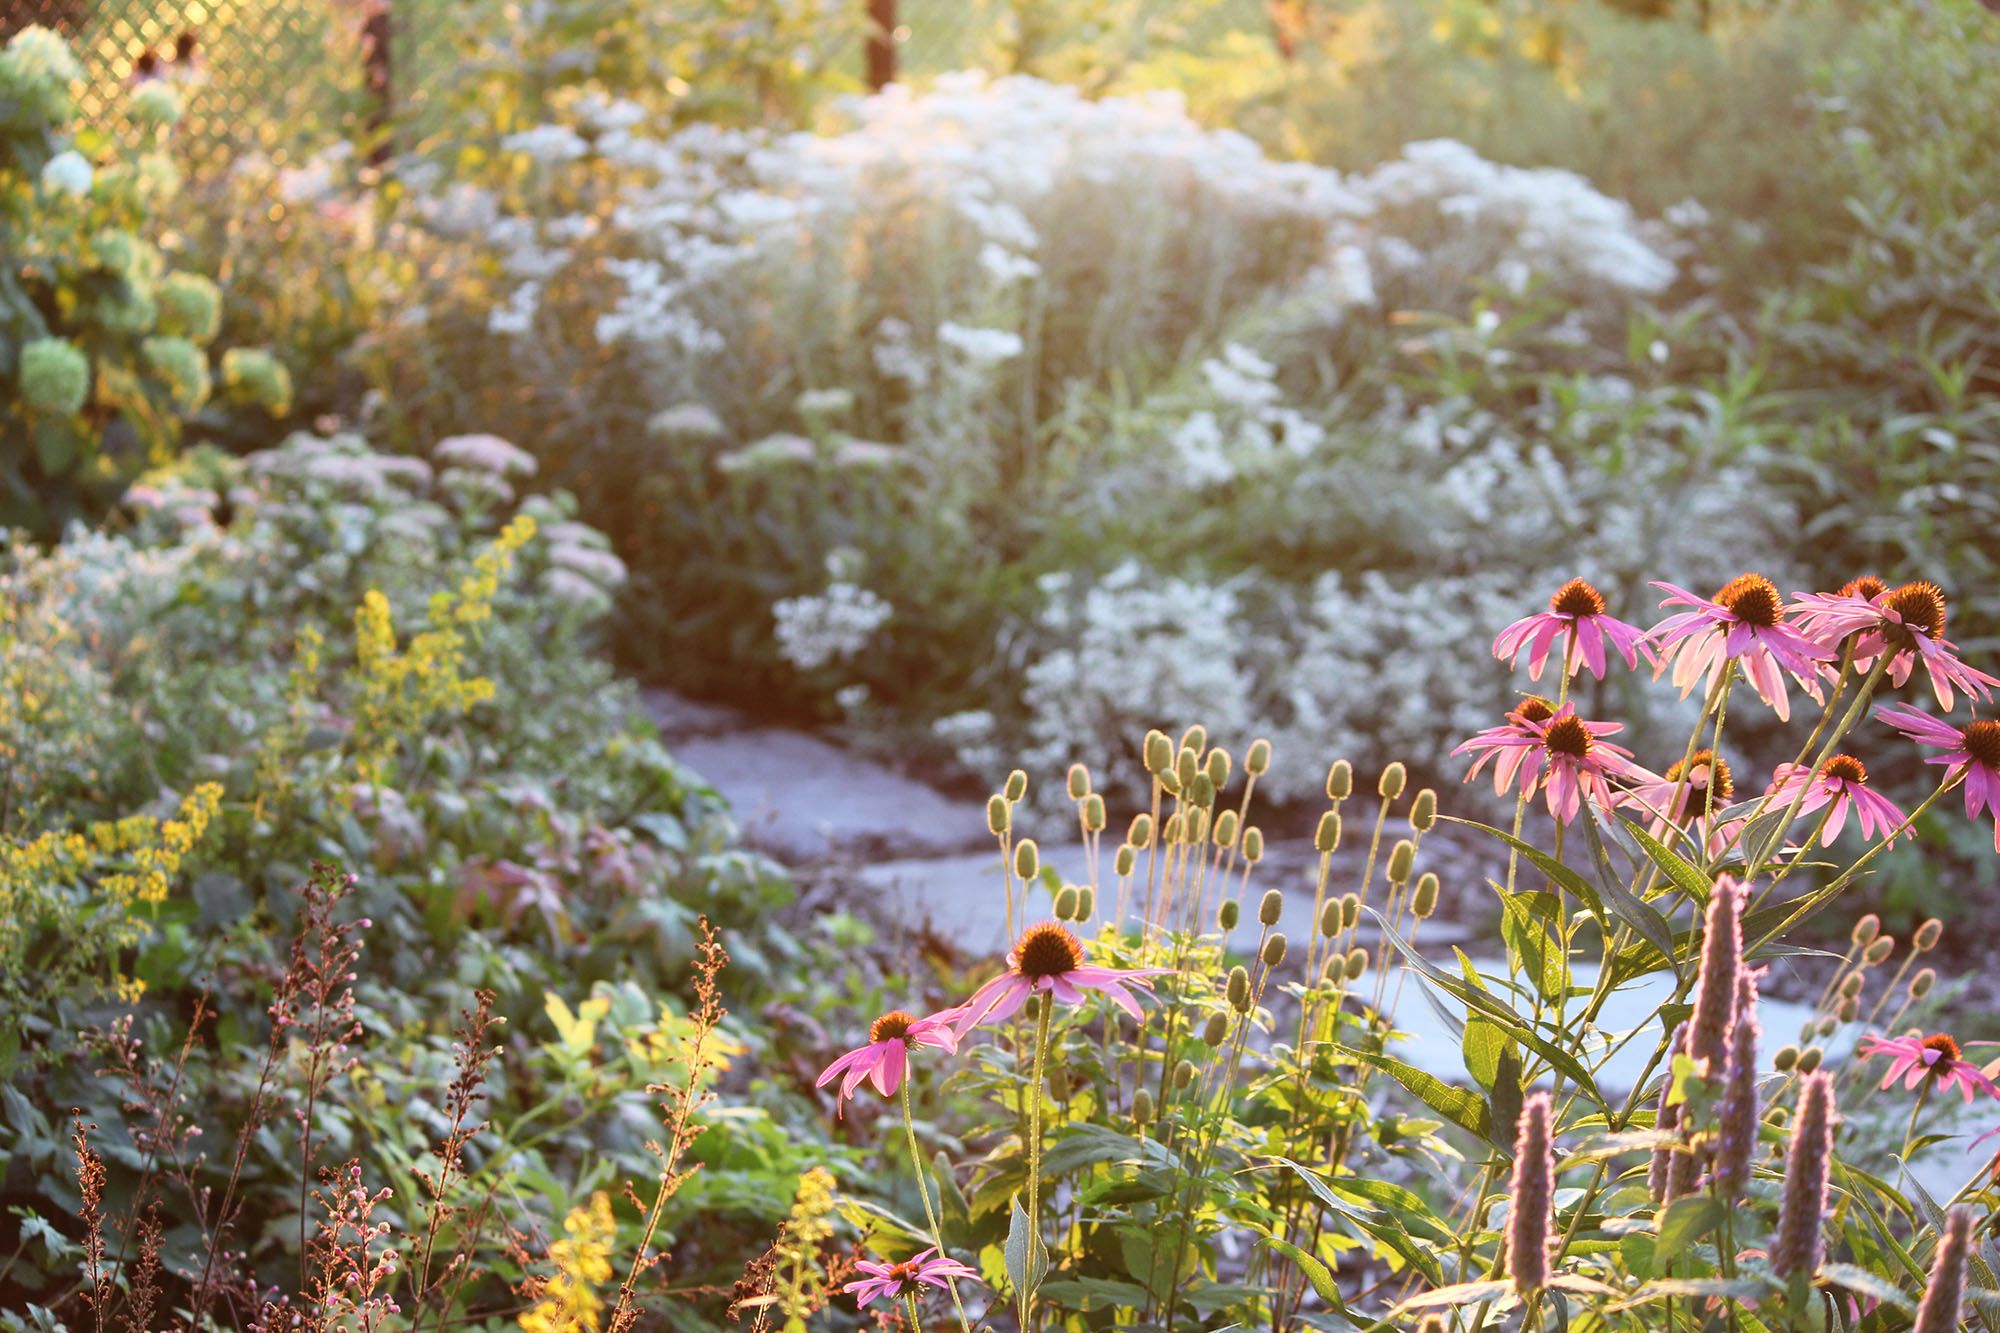 A native plant garden in Ontario with late-afternoon sunlight hitting the flowers